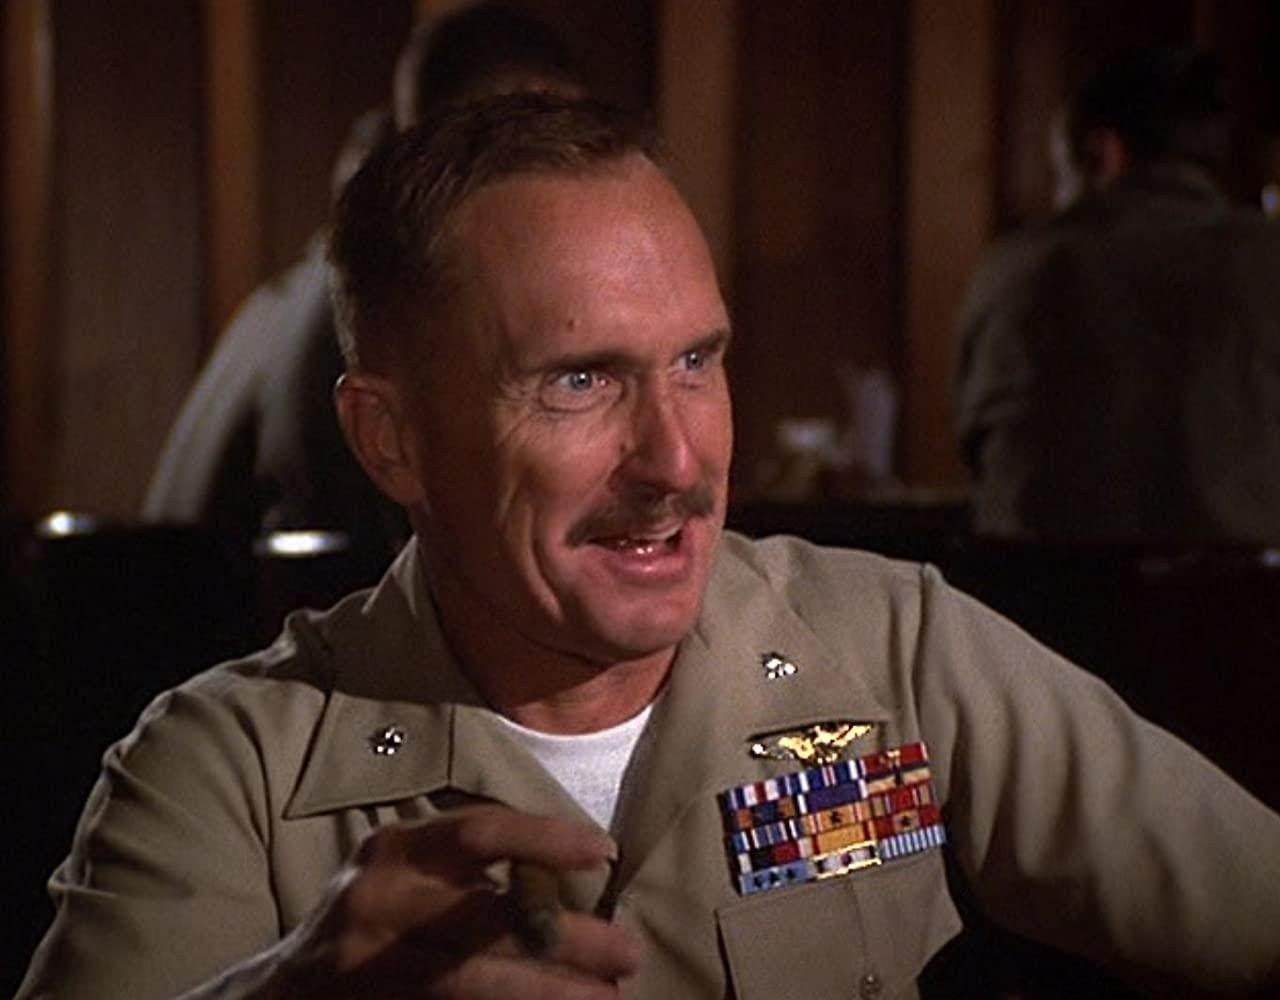 10 questions with Hollywood icon and Army veteran, Robert Duvall